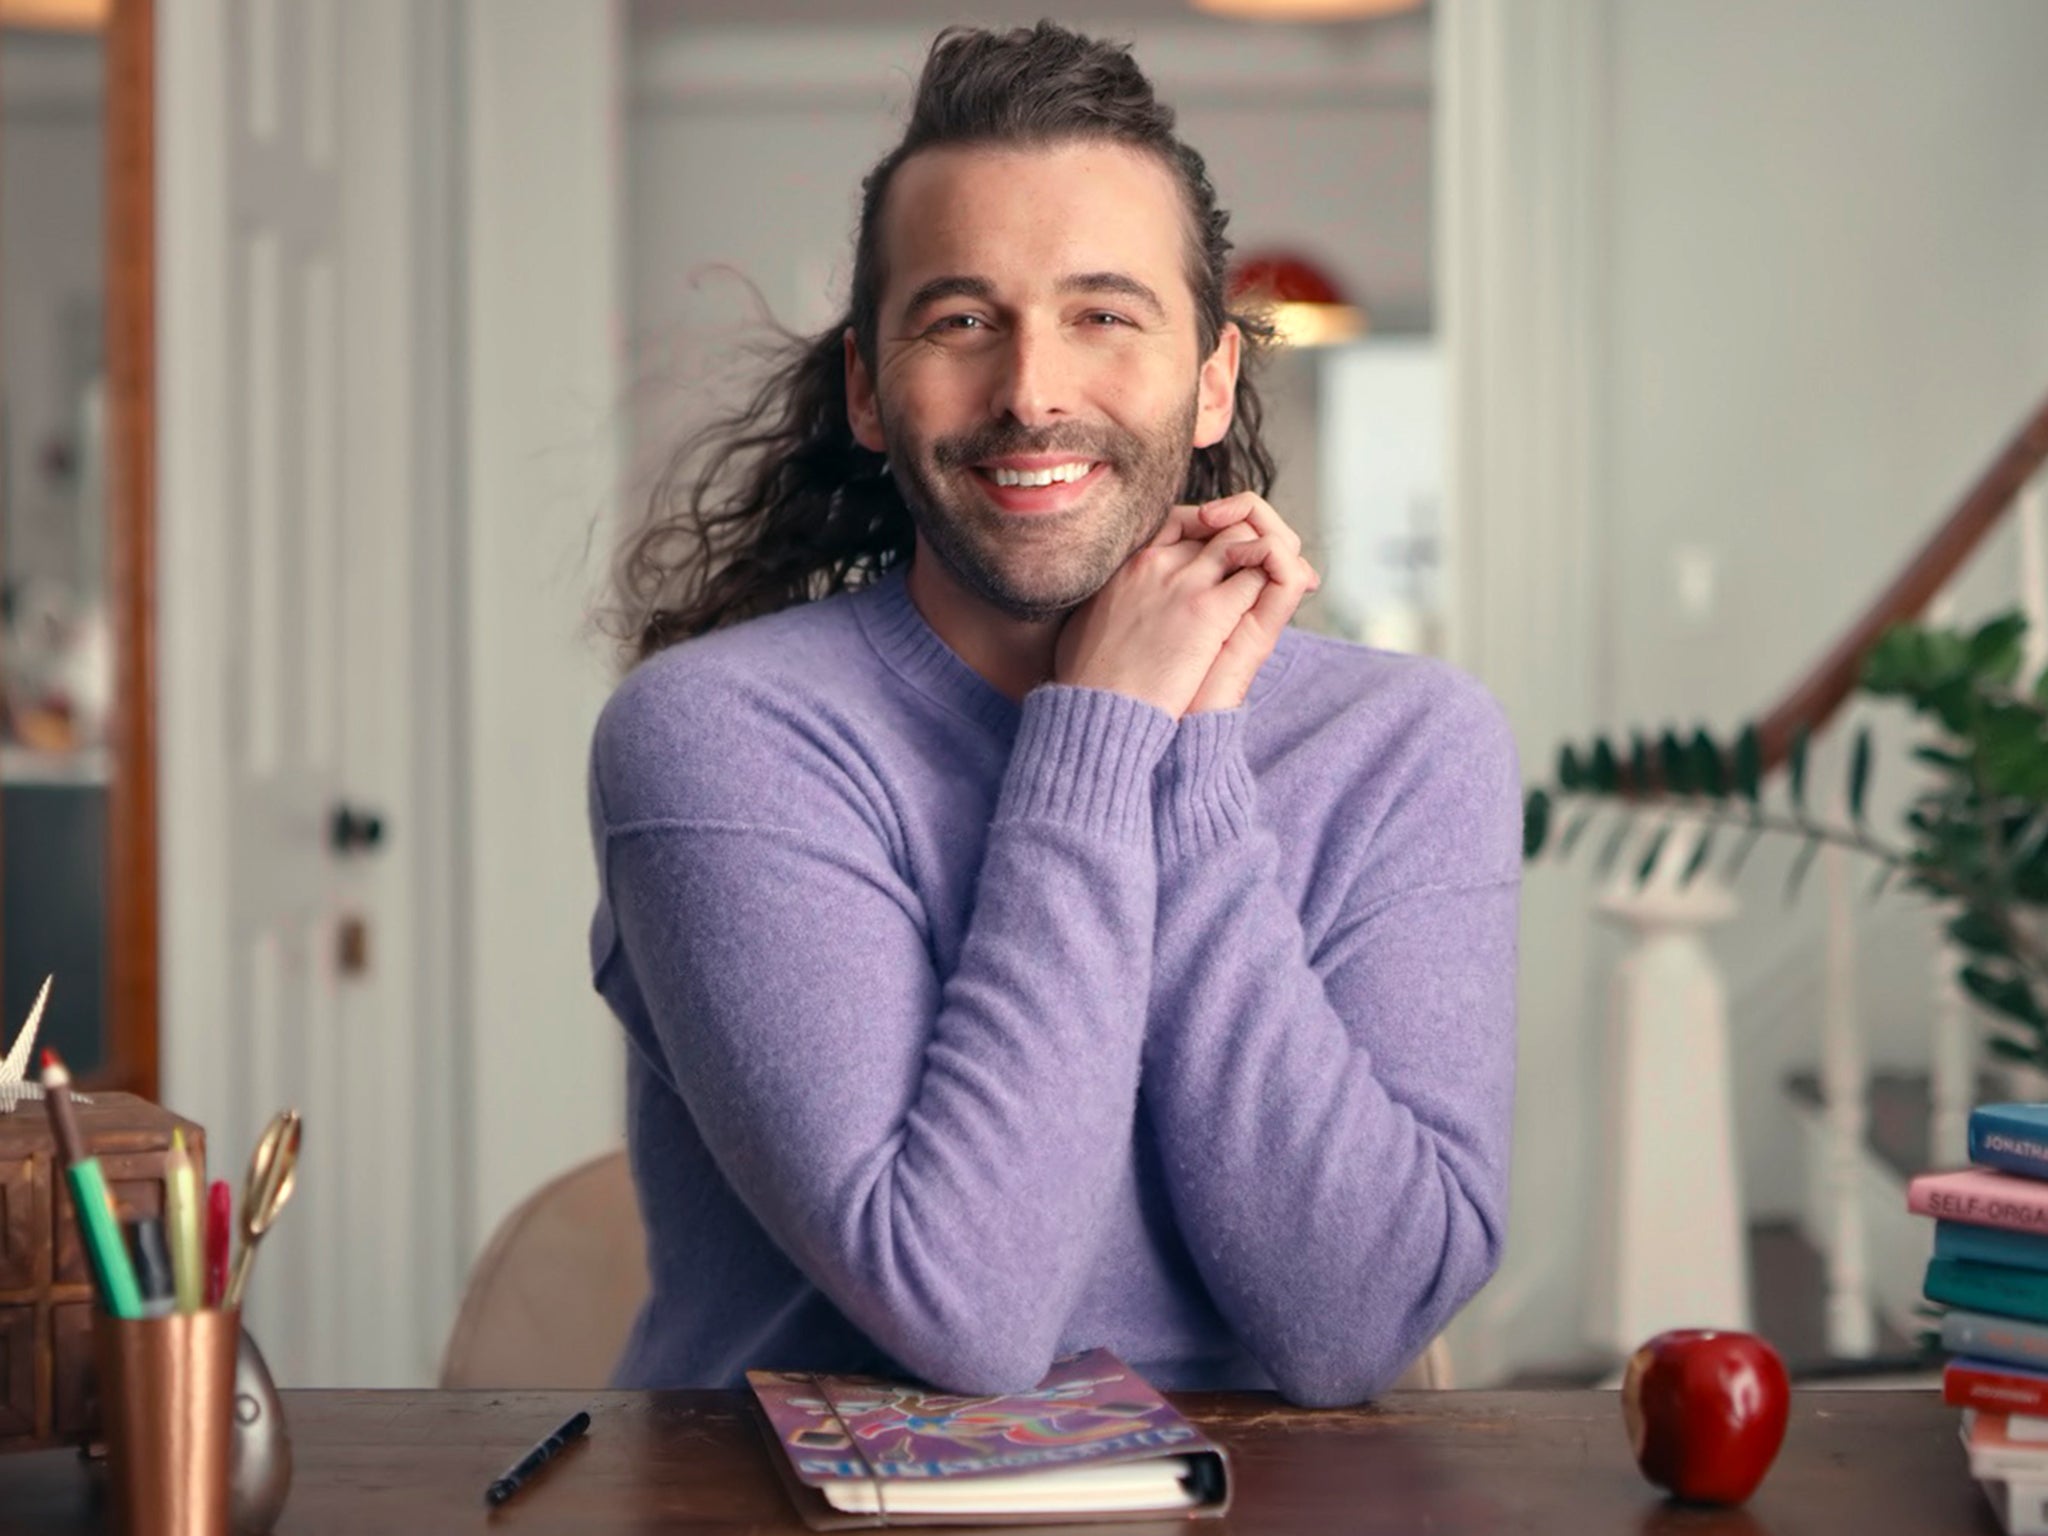 JVN’s new class is one of thousands you can take through the Skillshare platform